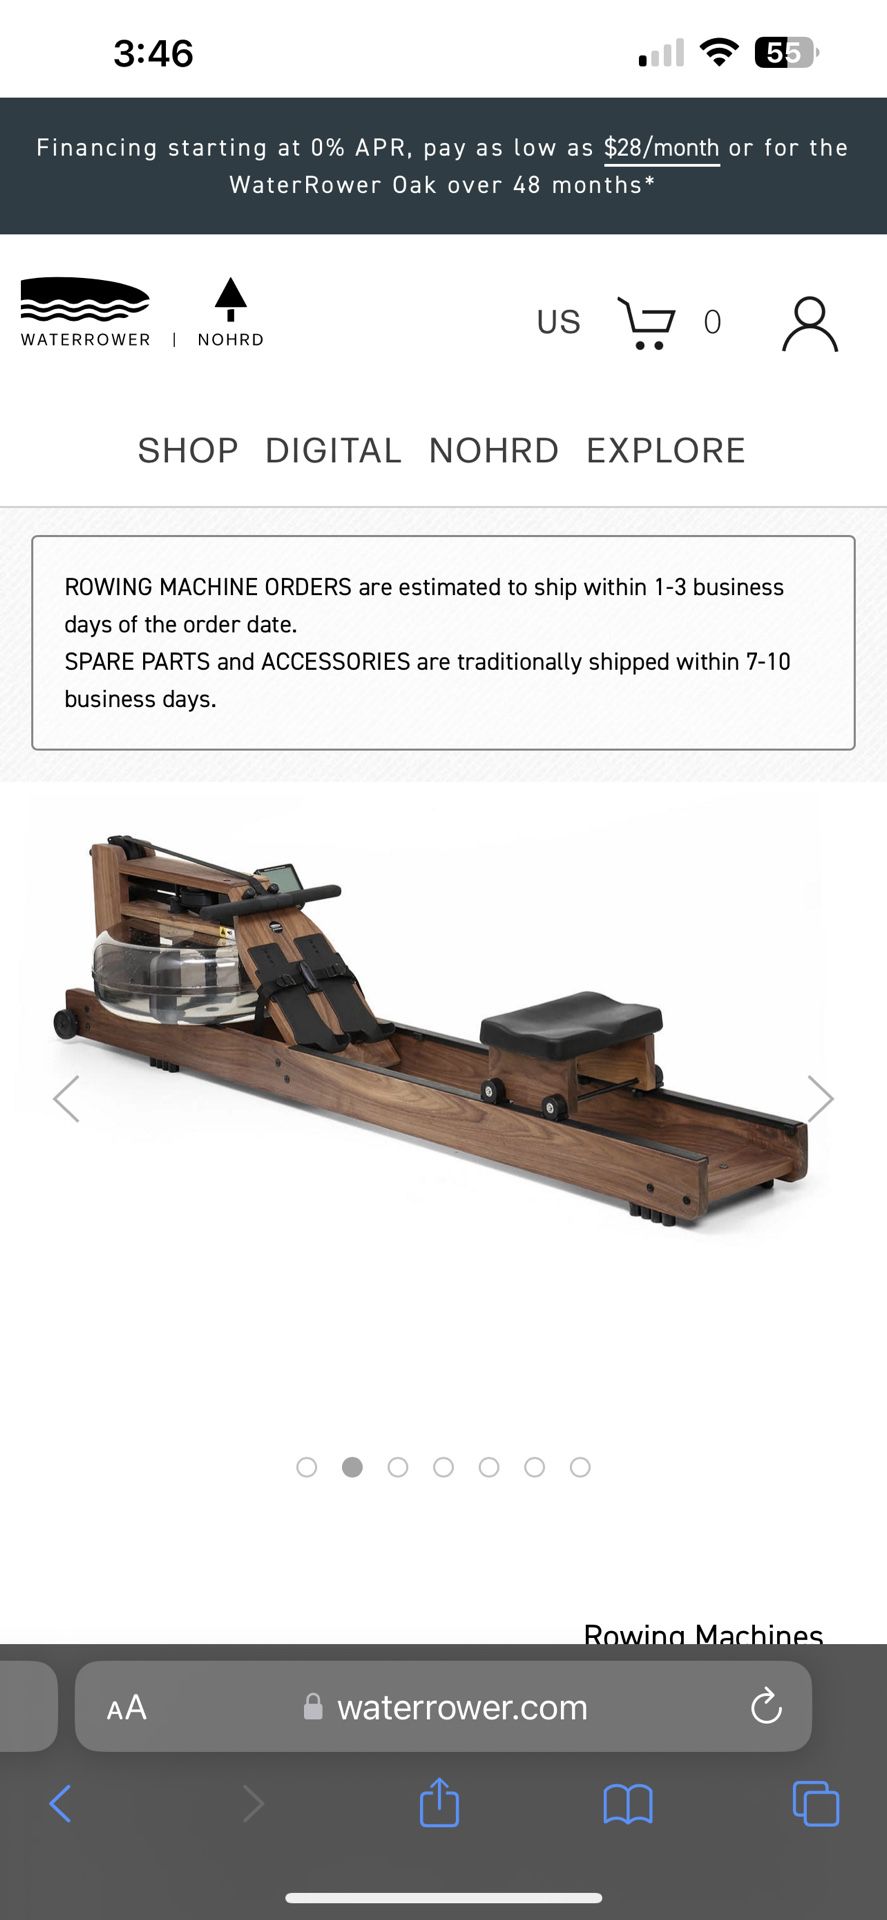 MUST SELL WaterRower With S4 Monitor - Walnut Color - EXCELLENT CONDITION 